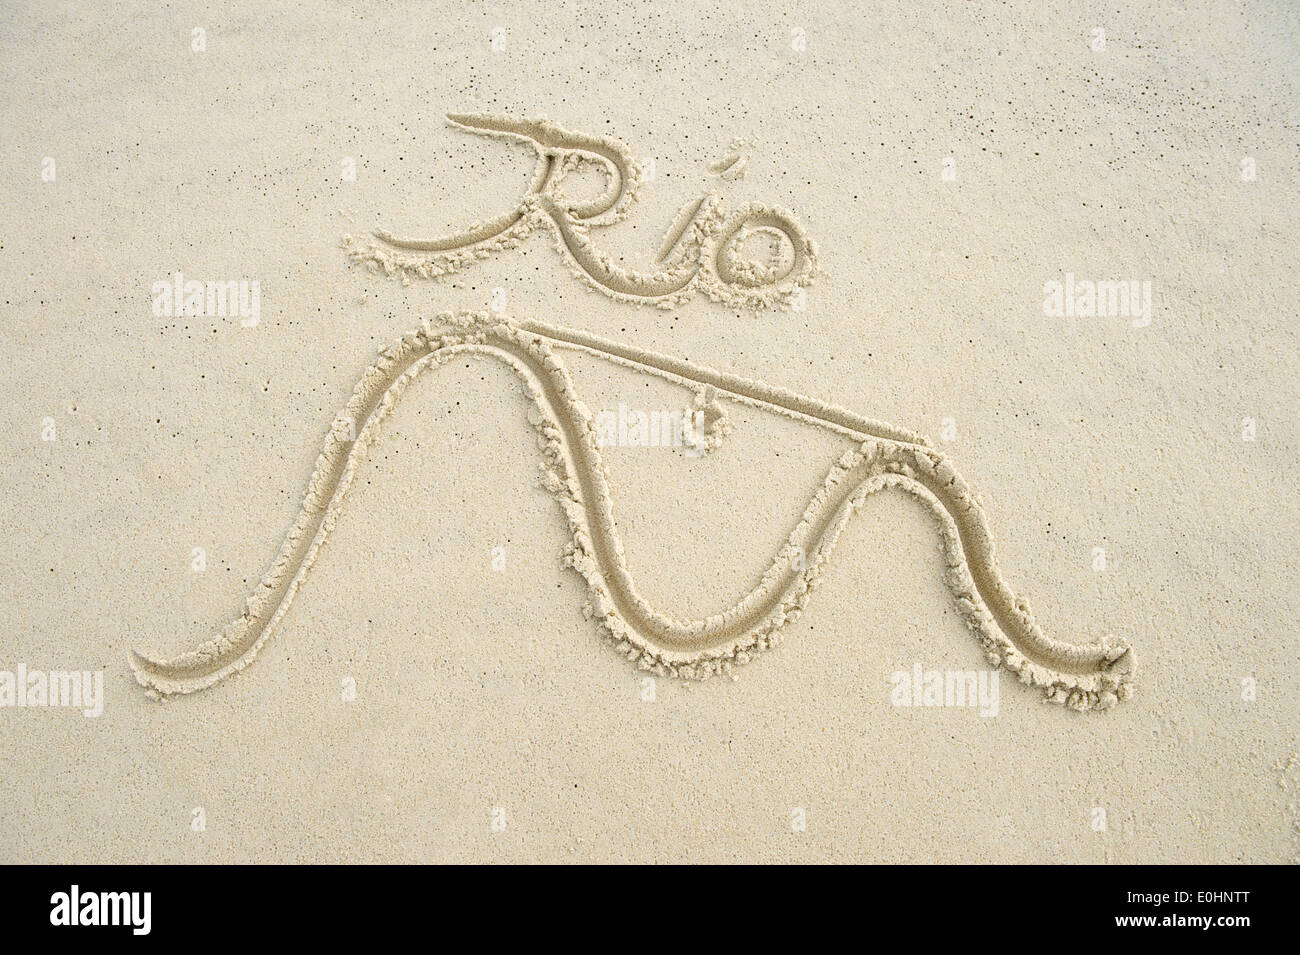 Rio de Janeiro message on sand beach with iconic shape of Sugarloaf Mountain Brazil Stock Photo